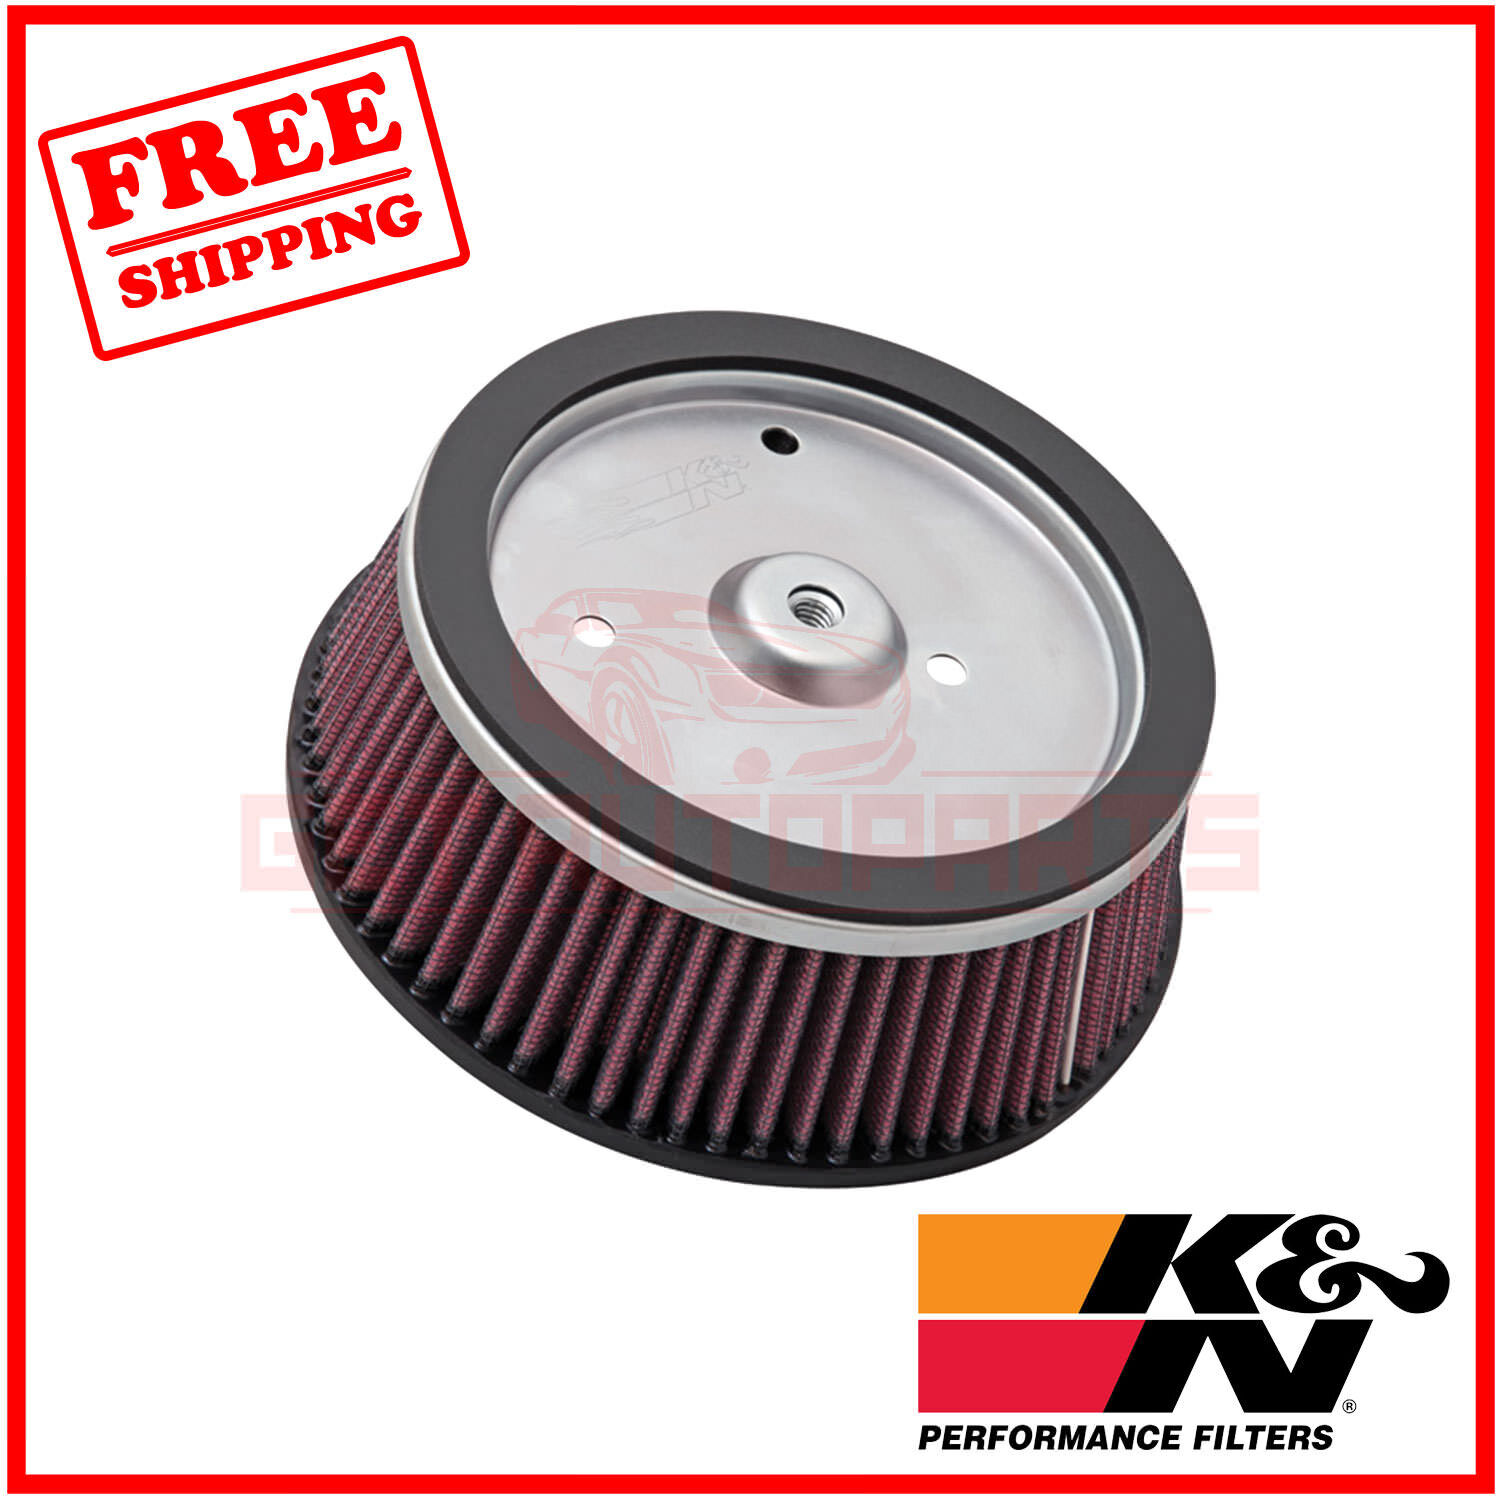 K&N Replacement Air Filter fits Harley Davidson FXDSE2 Screamin Eagle Dyna 2008